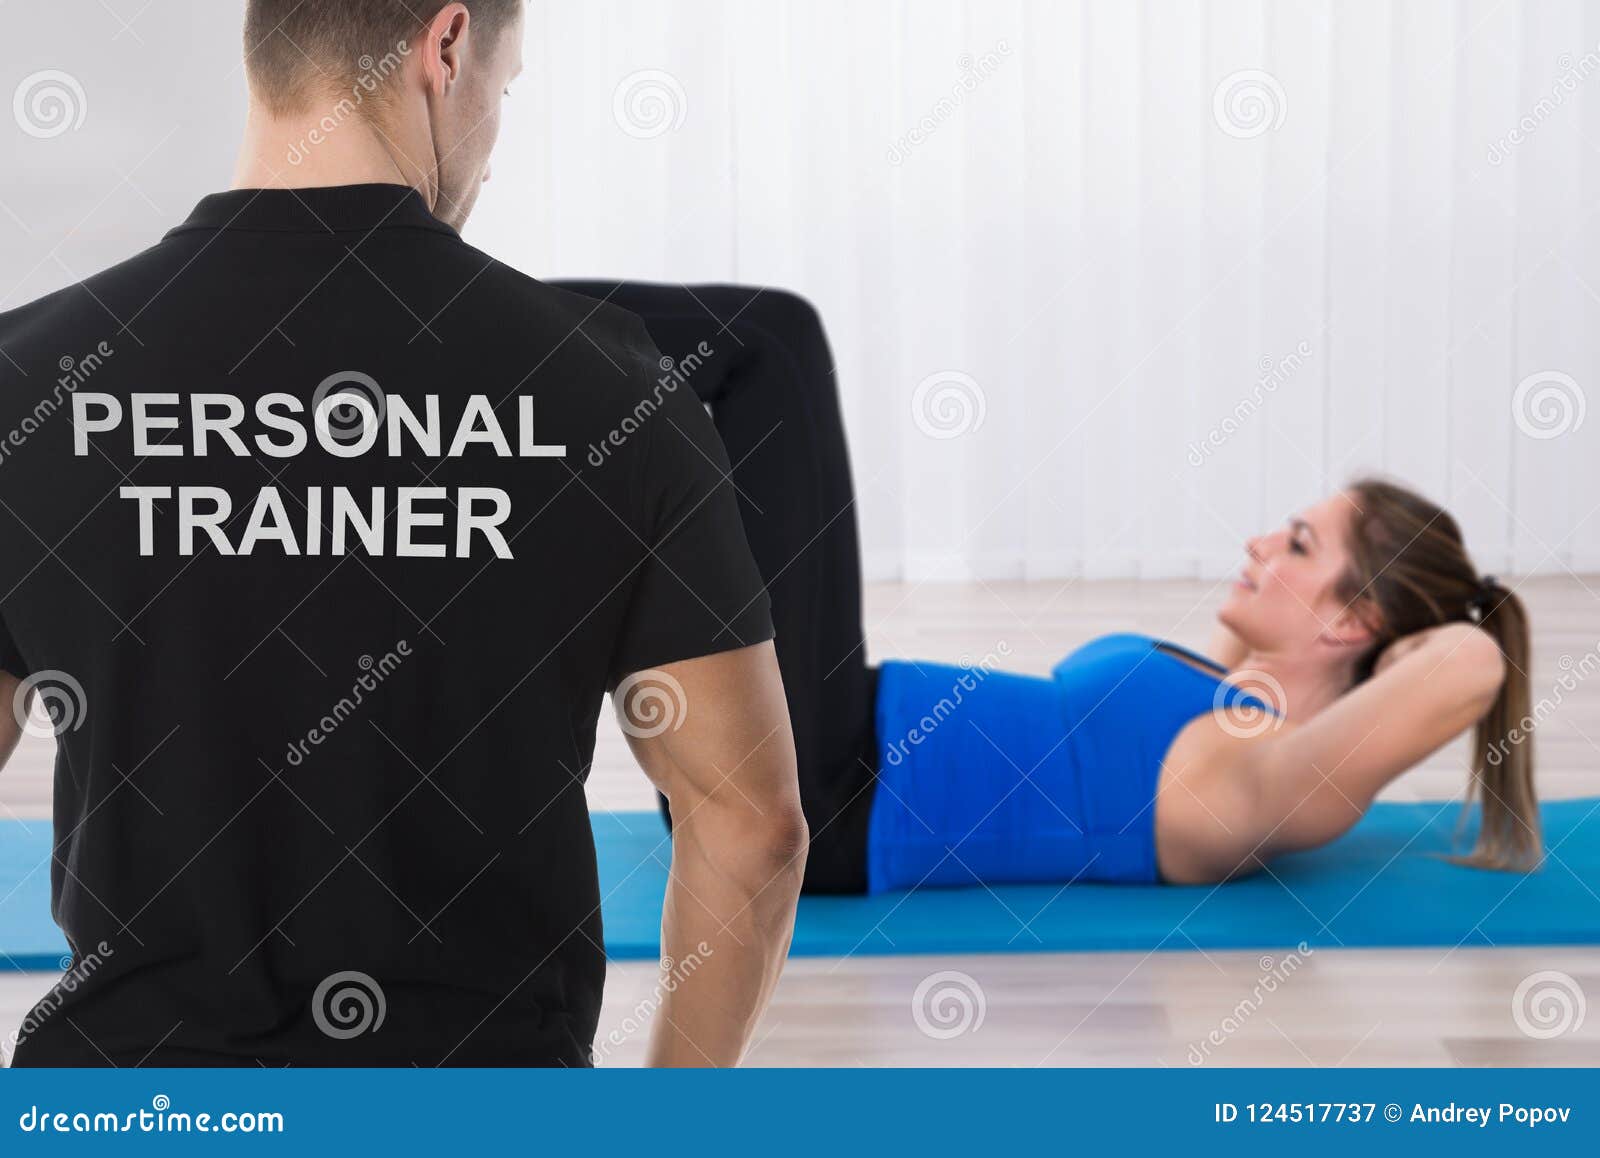 personal trainer looking at woman doing exercise